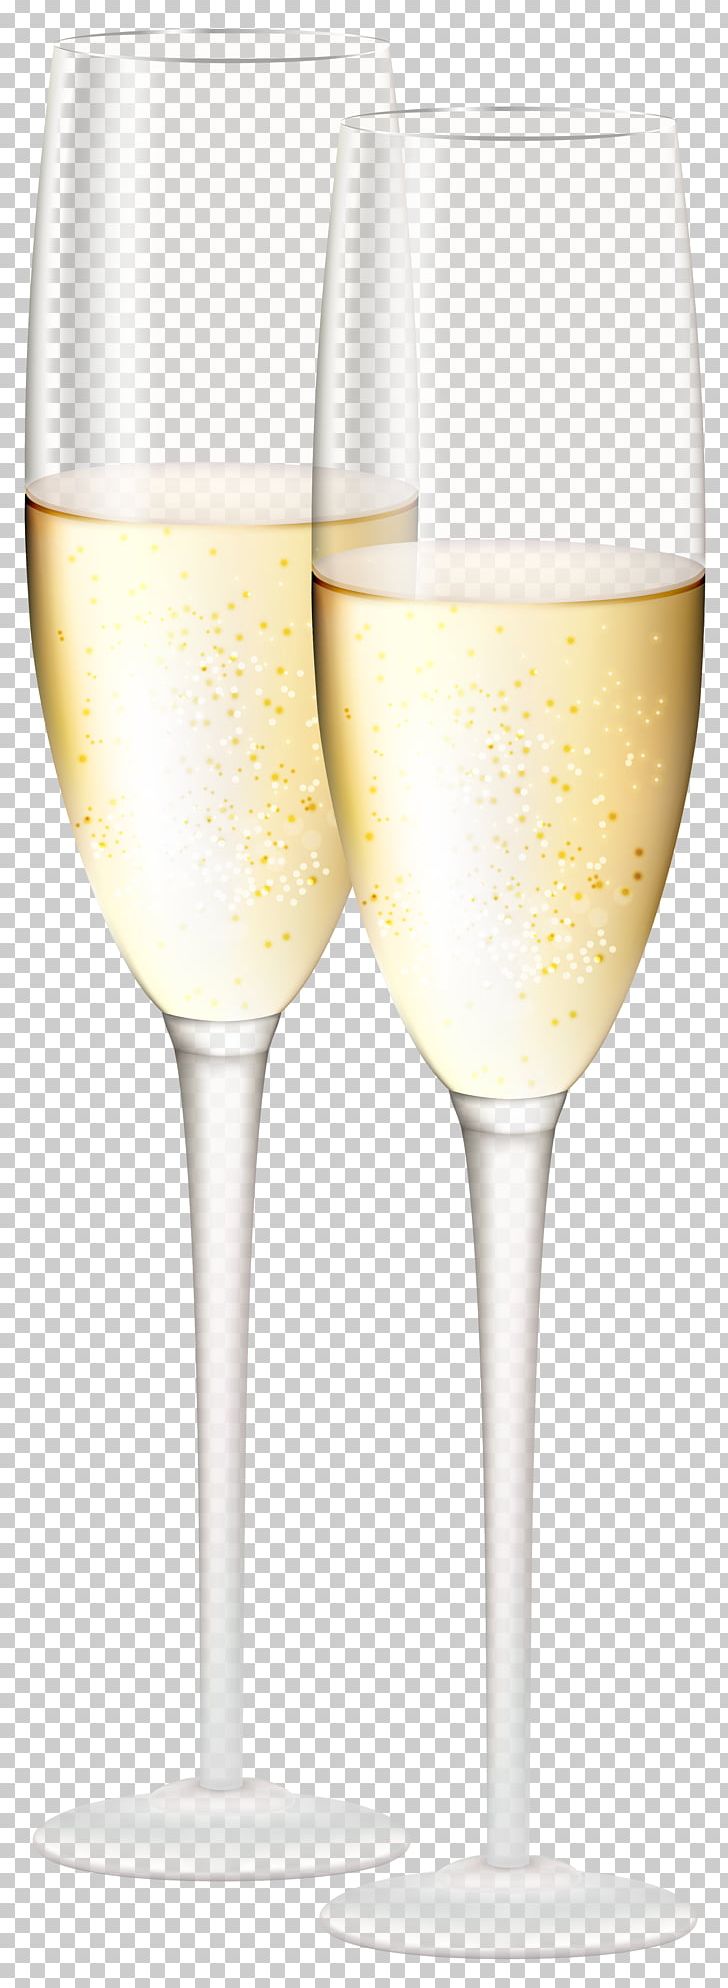 Champagne Glass Cocktail Wine PNG, Clipart, Beer Glass, Bottle, Champagne, Champagne Glass, Champagne Stemware Free PNG Download